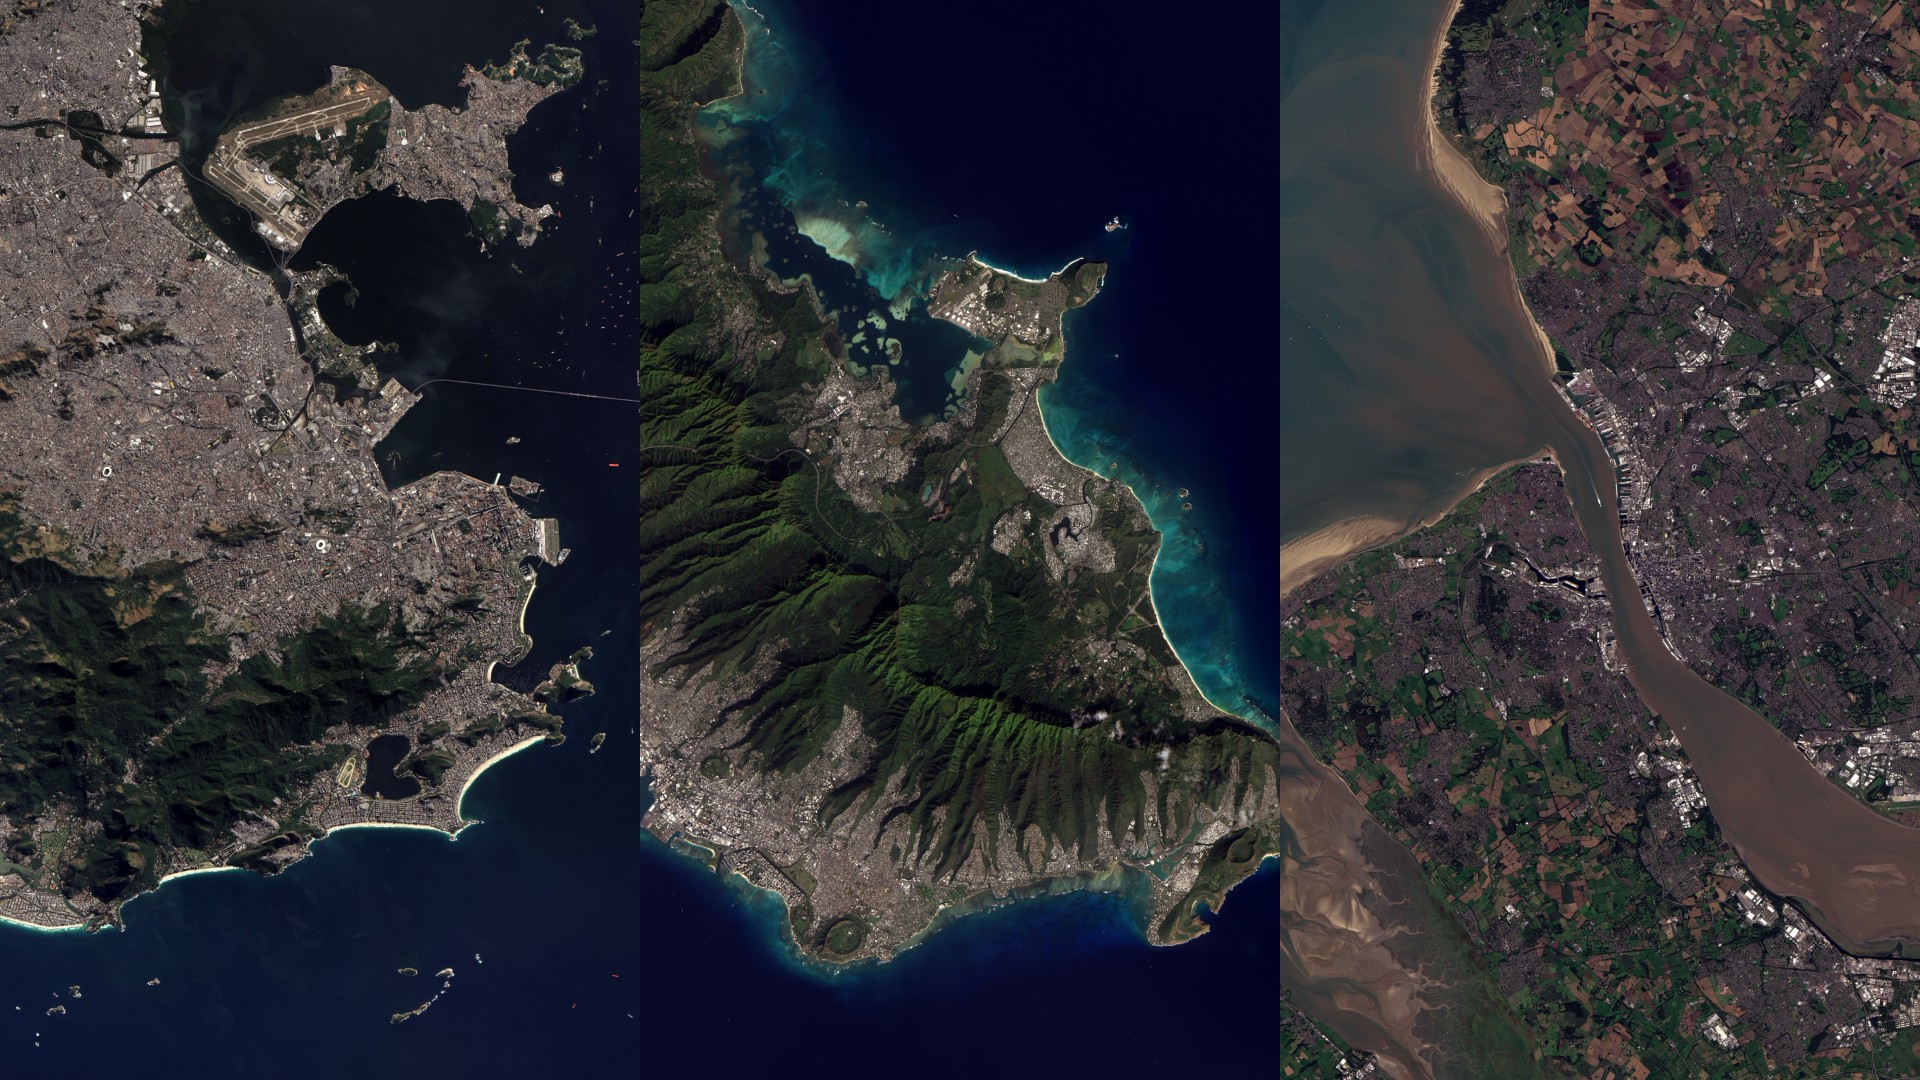 Satellite photo with 3 panels: left is a city with mountains and beaches at the South, middle is a slice of an island with green mountains at the center, right is a brown river delta leading to a murky sea with a city.